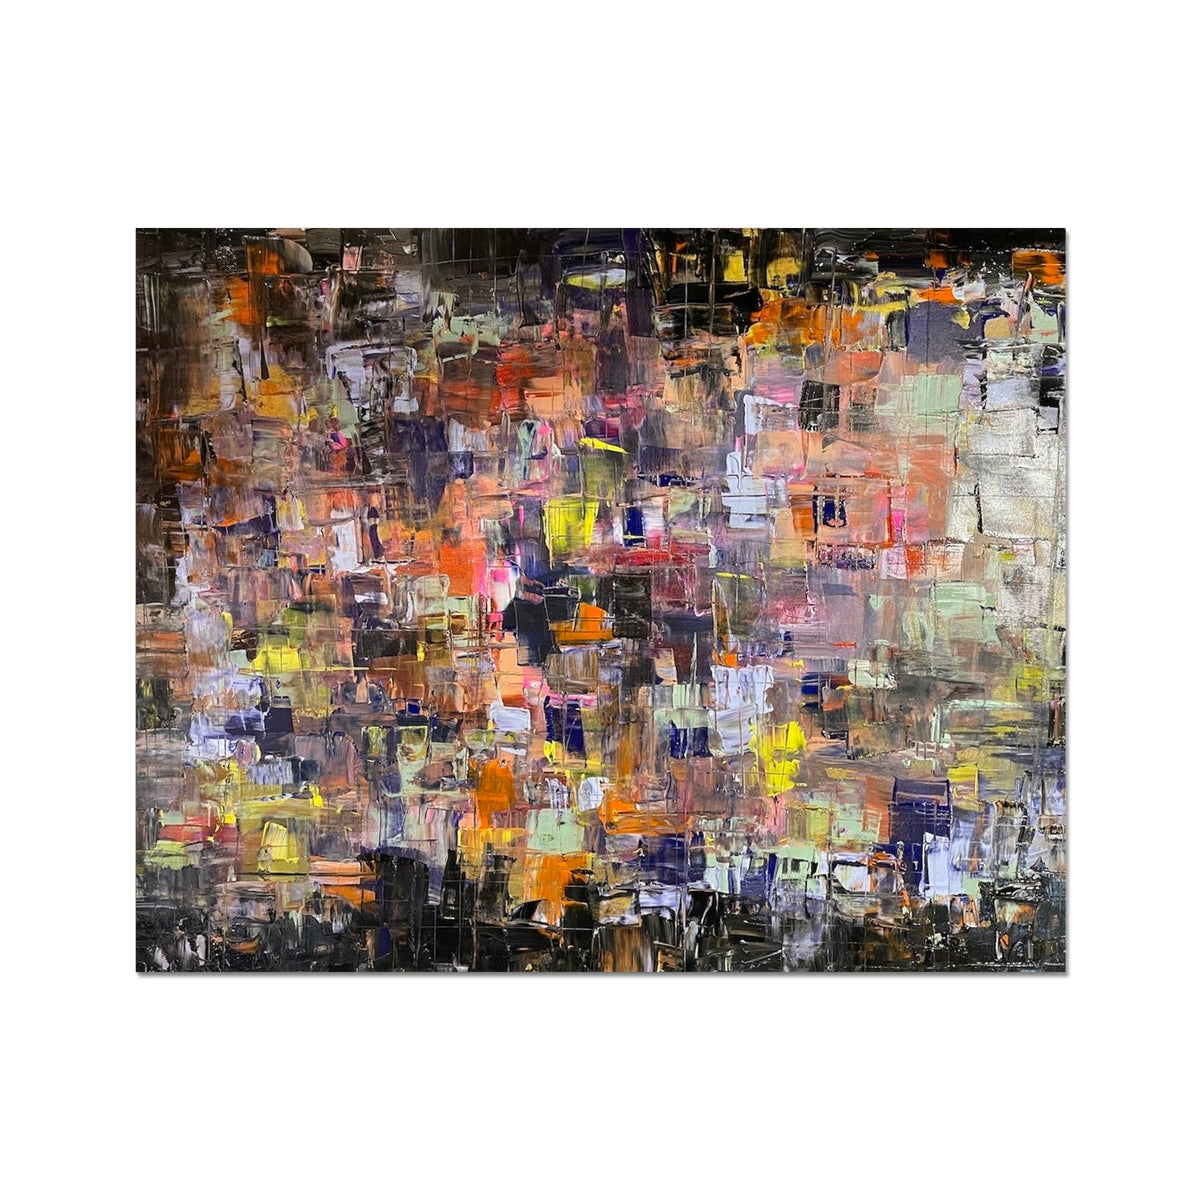 Never Enough Abstract Painting | Artist Proof Collector Prints From Scotland-Artist Proof Collector Prints-Abstract & Impressionistic Art Gallery-20"x16"-Paintings, Prints, Homeware, Art Gifts From Scotland By Scottish Artist Kevin Hunter